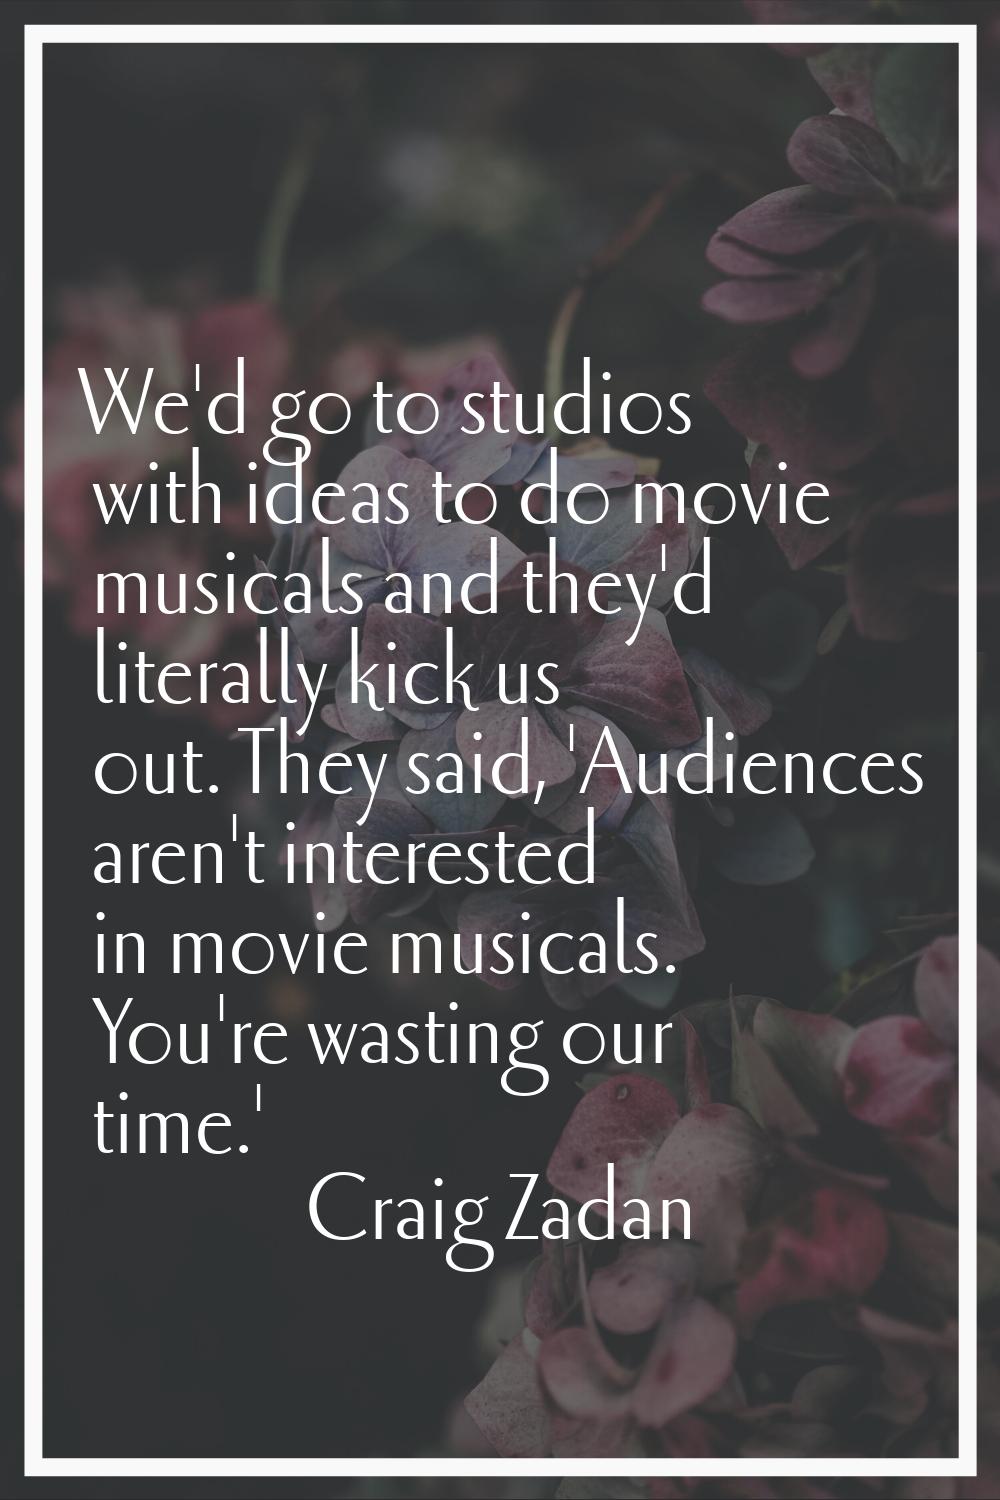 We'd go to studios with ideas to do movie musicals and they'd literally kick us out. They said, 'Au